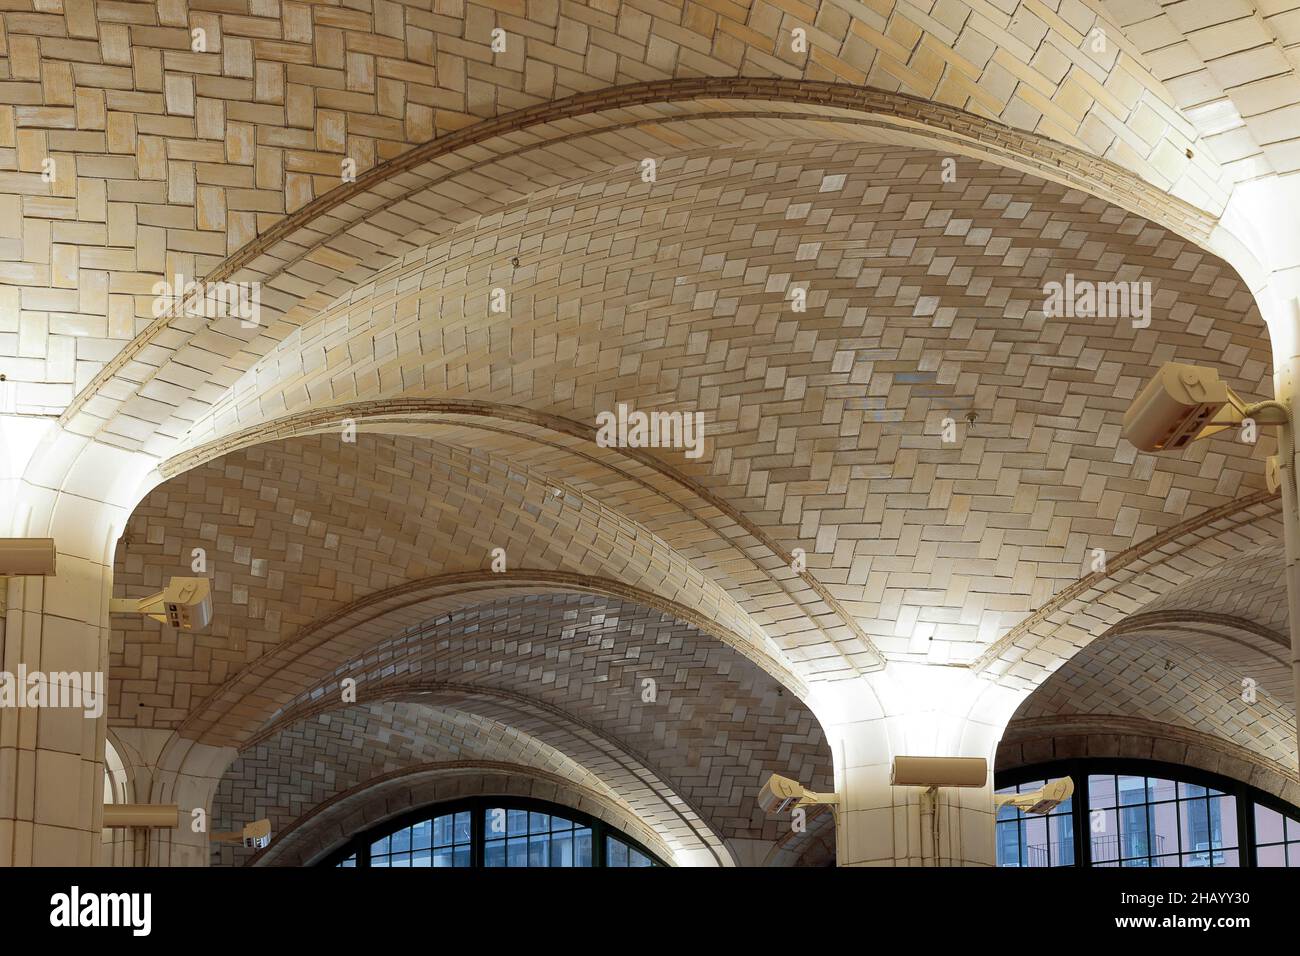 A Guastavino terracotta tile vault ceiling inside a building in New York, NY. Rafael Guastavino was famous for his interlocking tile and arch system Stock Photo